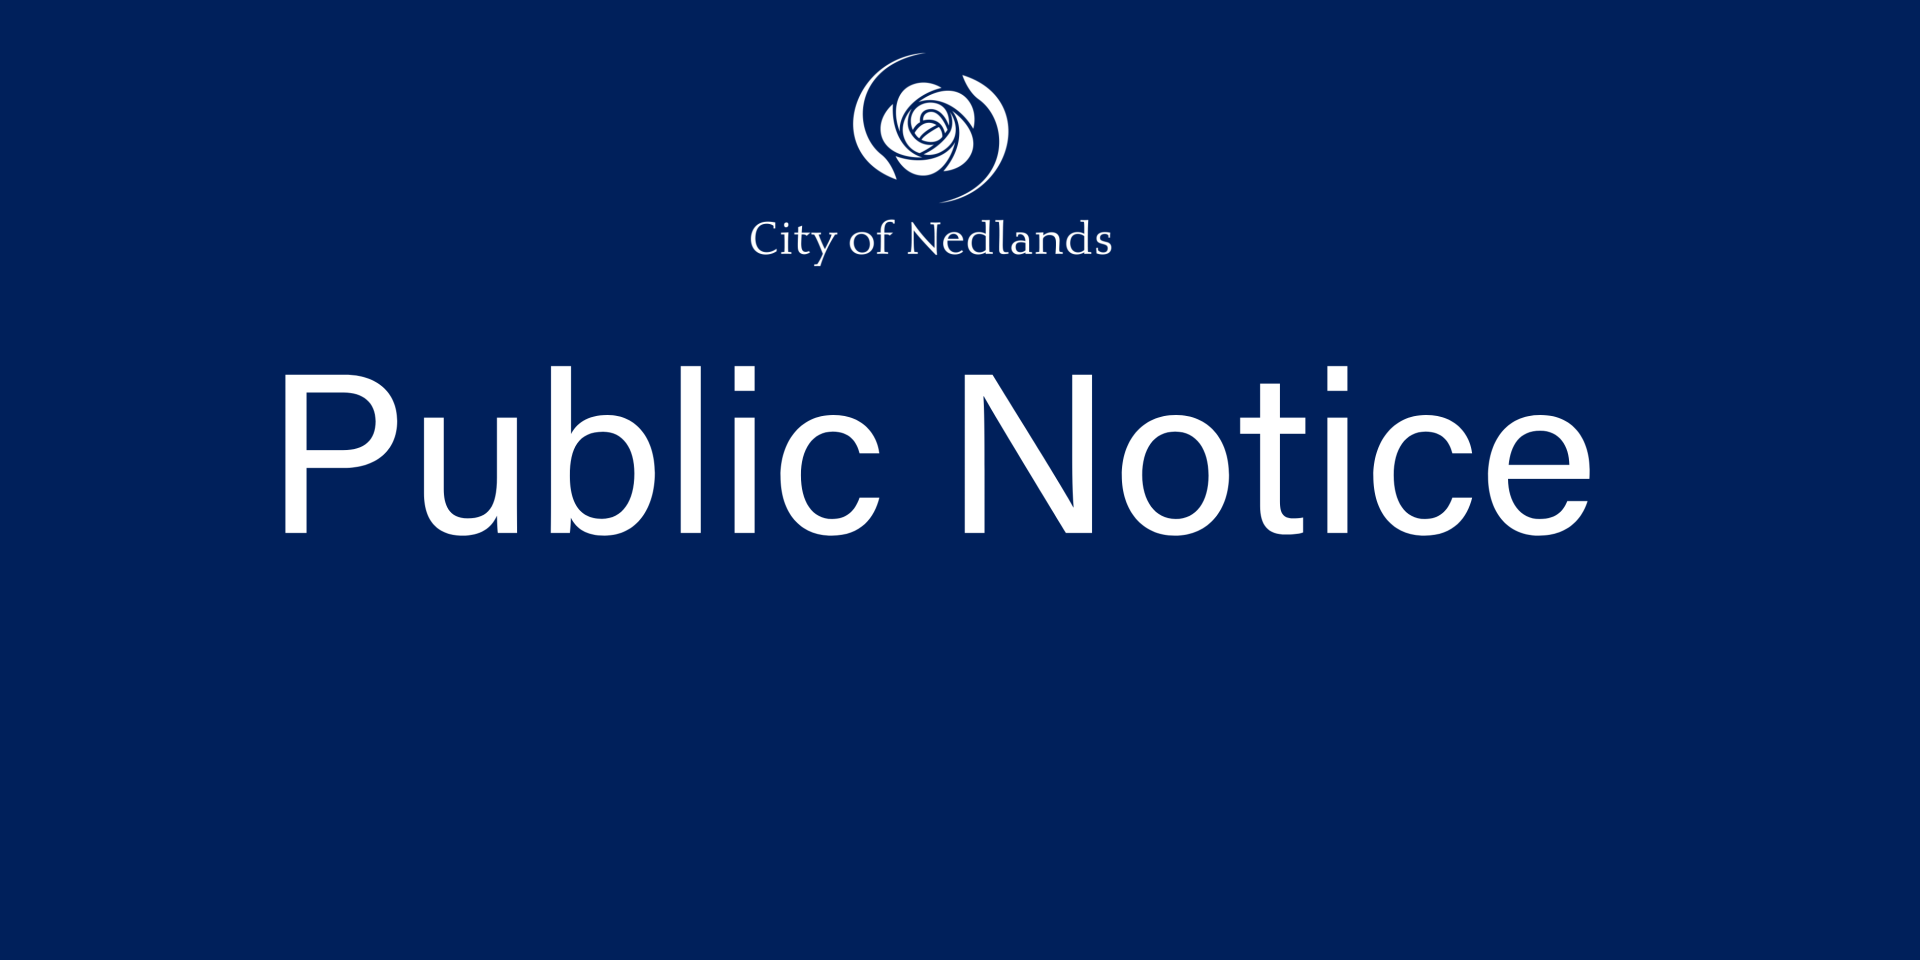 Notice of Special Council Meeting - Tuesday 31 January 2023 at 6:30pm